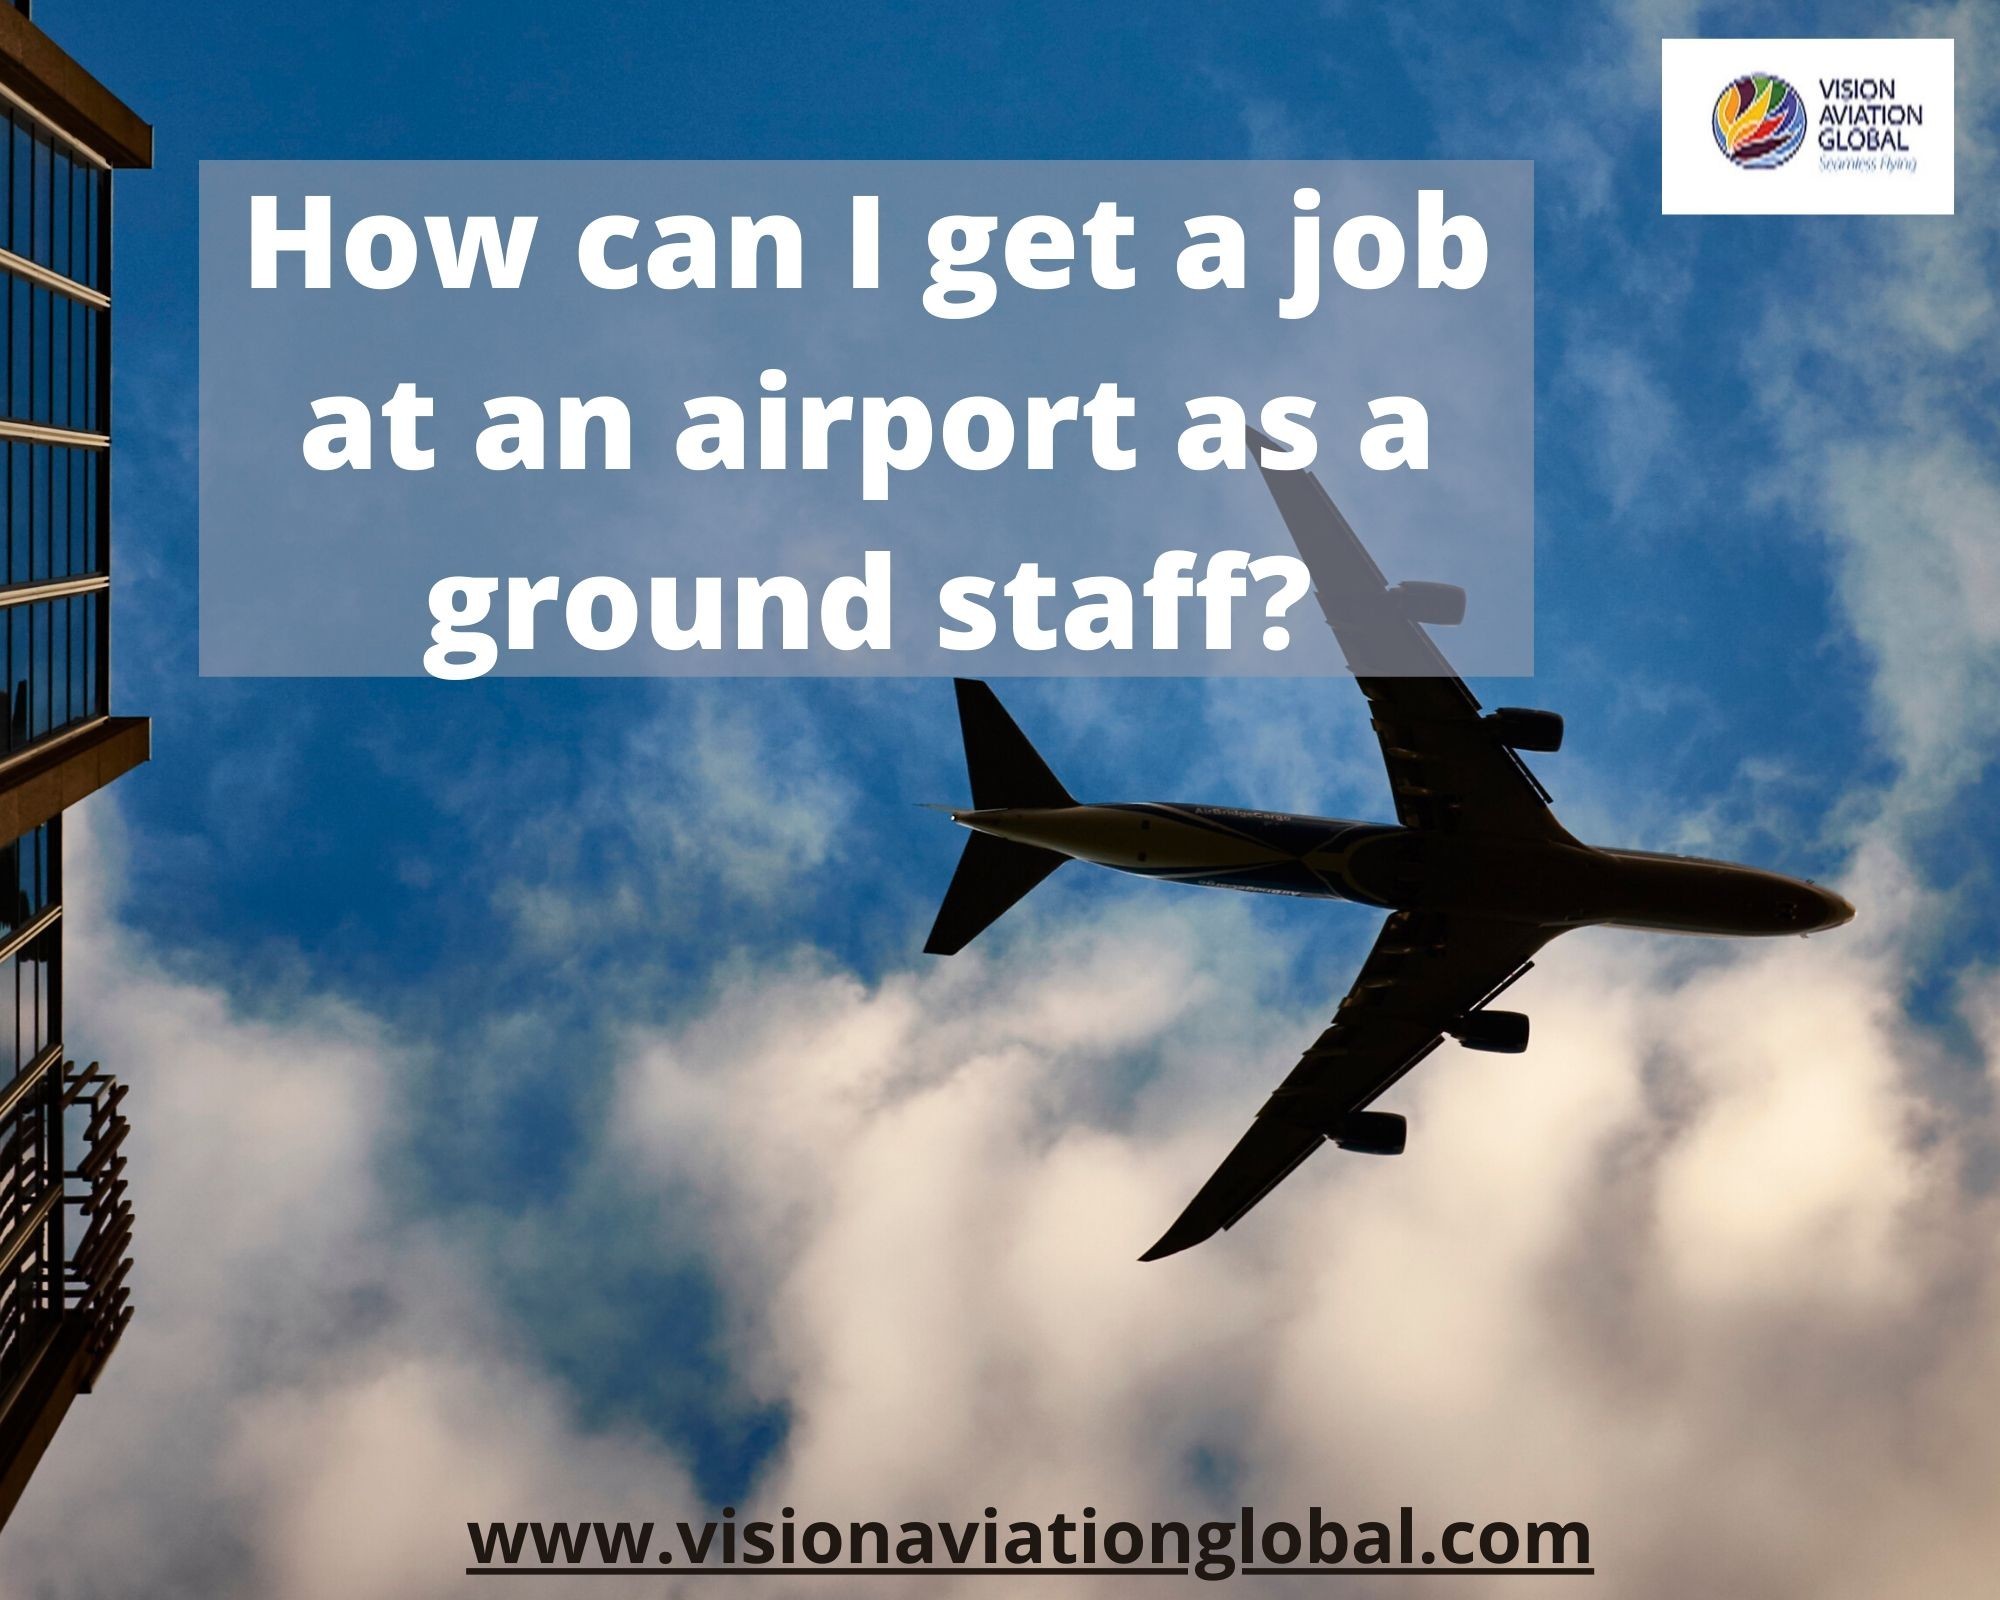 How can I get a job at an airport as a ground staff?